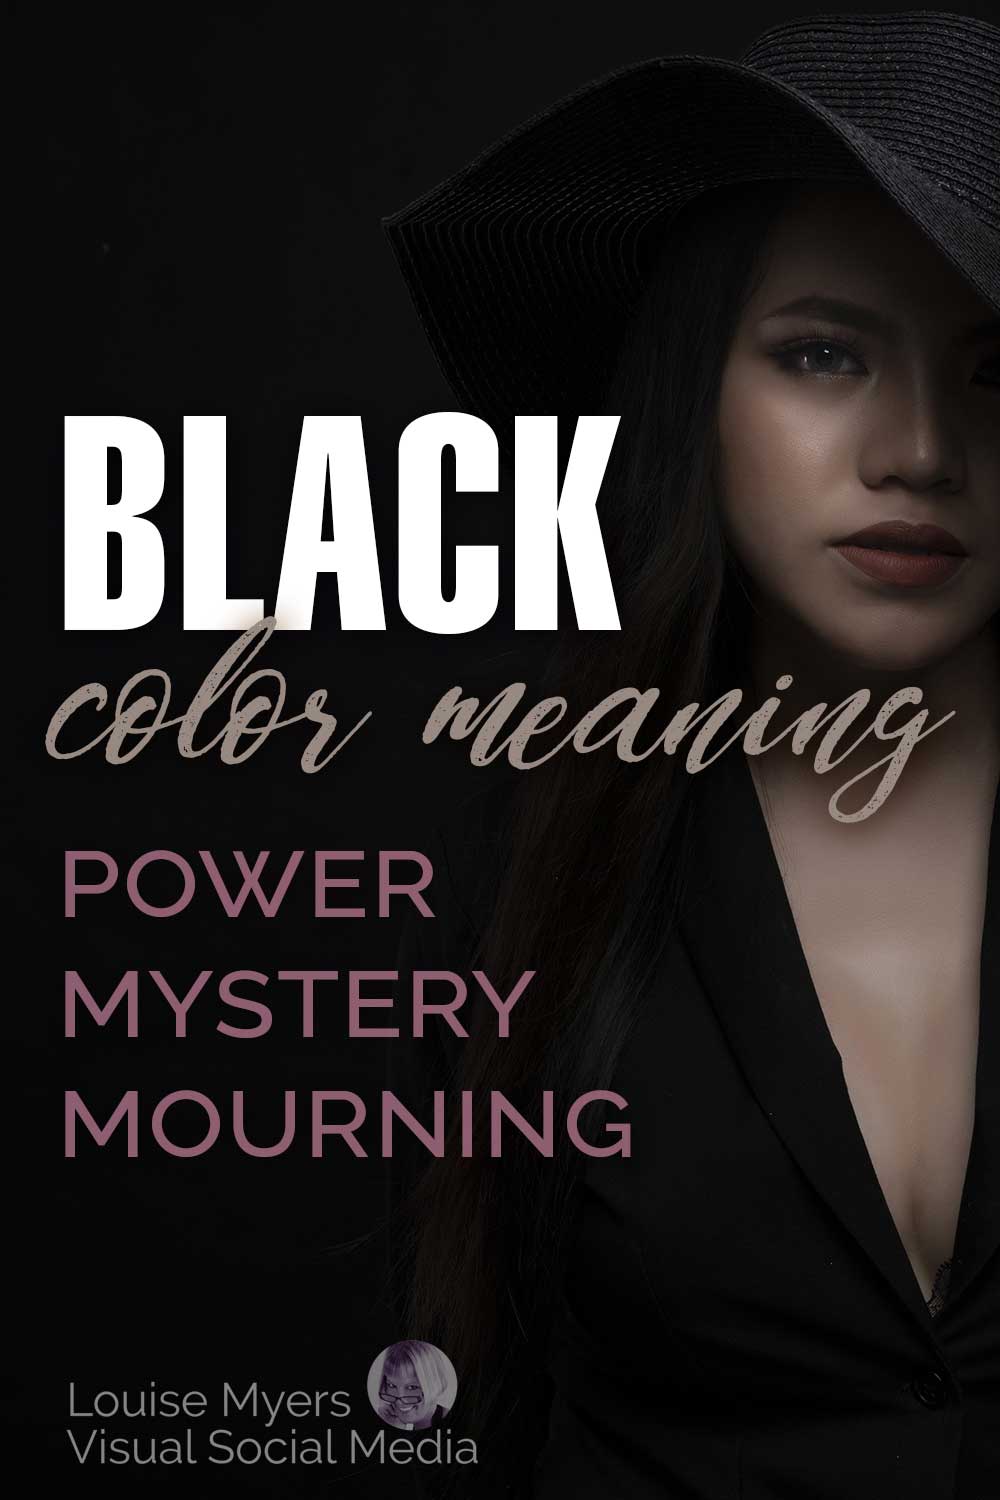 shaded and mysterious woman in black against black background with text, Black Color Meaning, power mystery mourning.